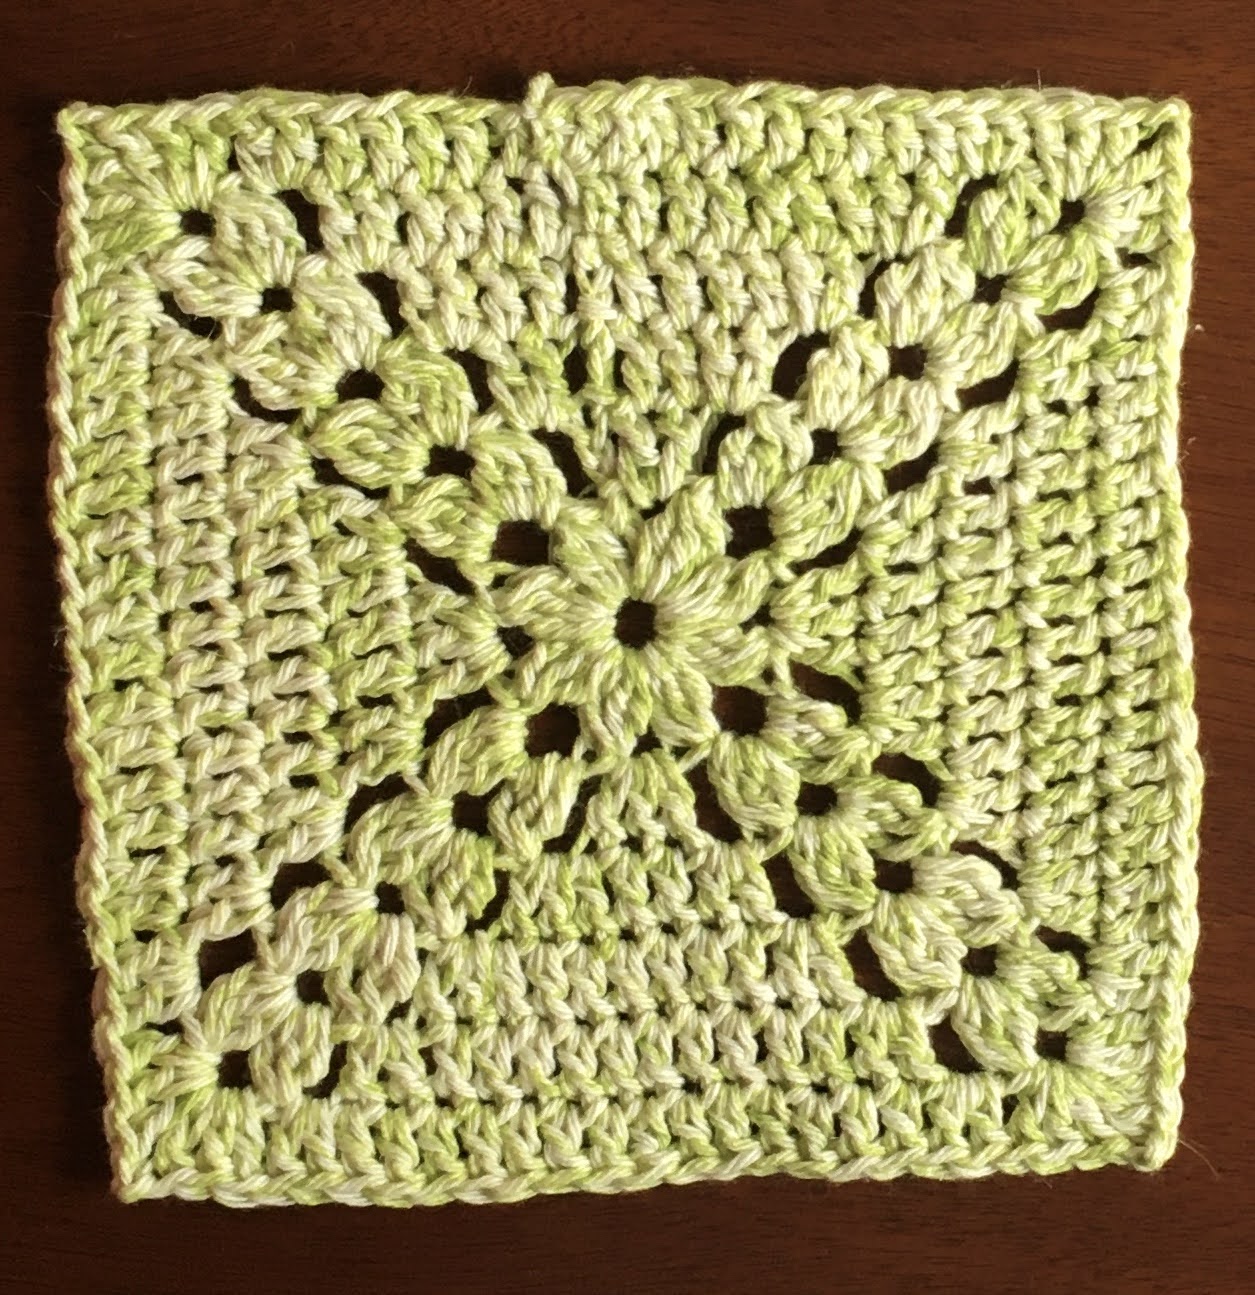 A crocheted green square, with stitches that create a thick X-shaped pattern in the center.